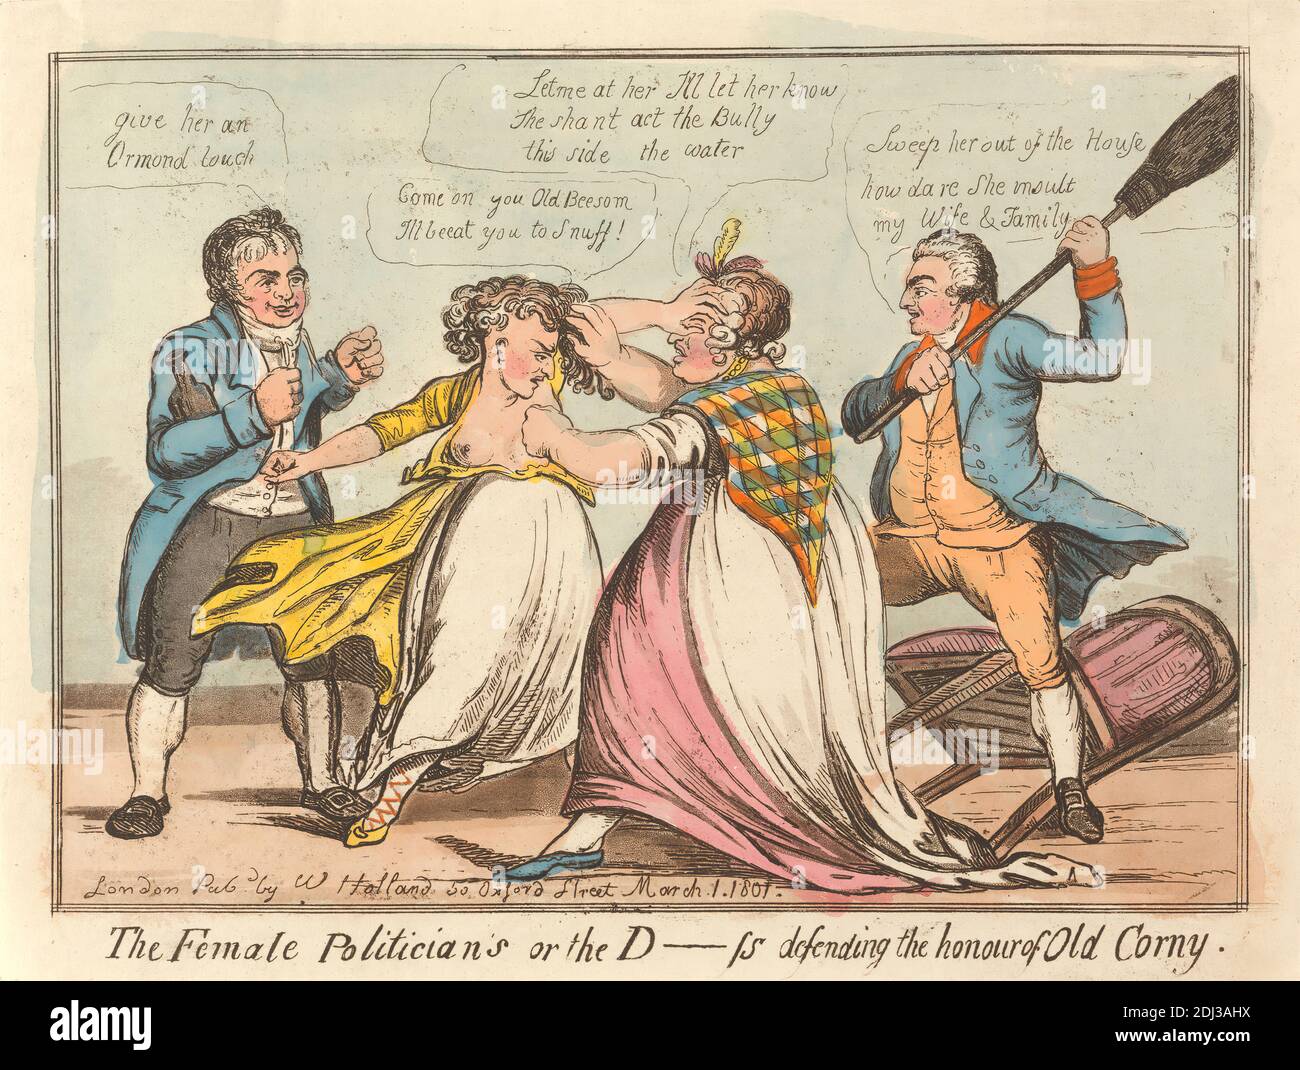 The Female Politicers, or - The D____ss Defending the Honor of Old Corny, unknown artist, 1801, Radierung und Aquatinta, handfarbig, Blatt: 7 15/16 x 11in. (20.2 x 27,9 cm Stockfoto